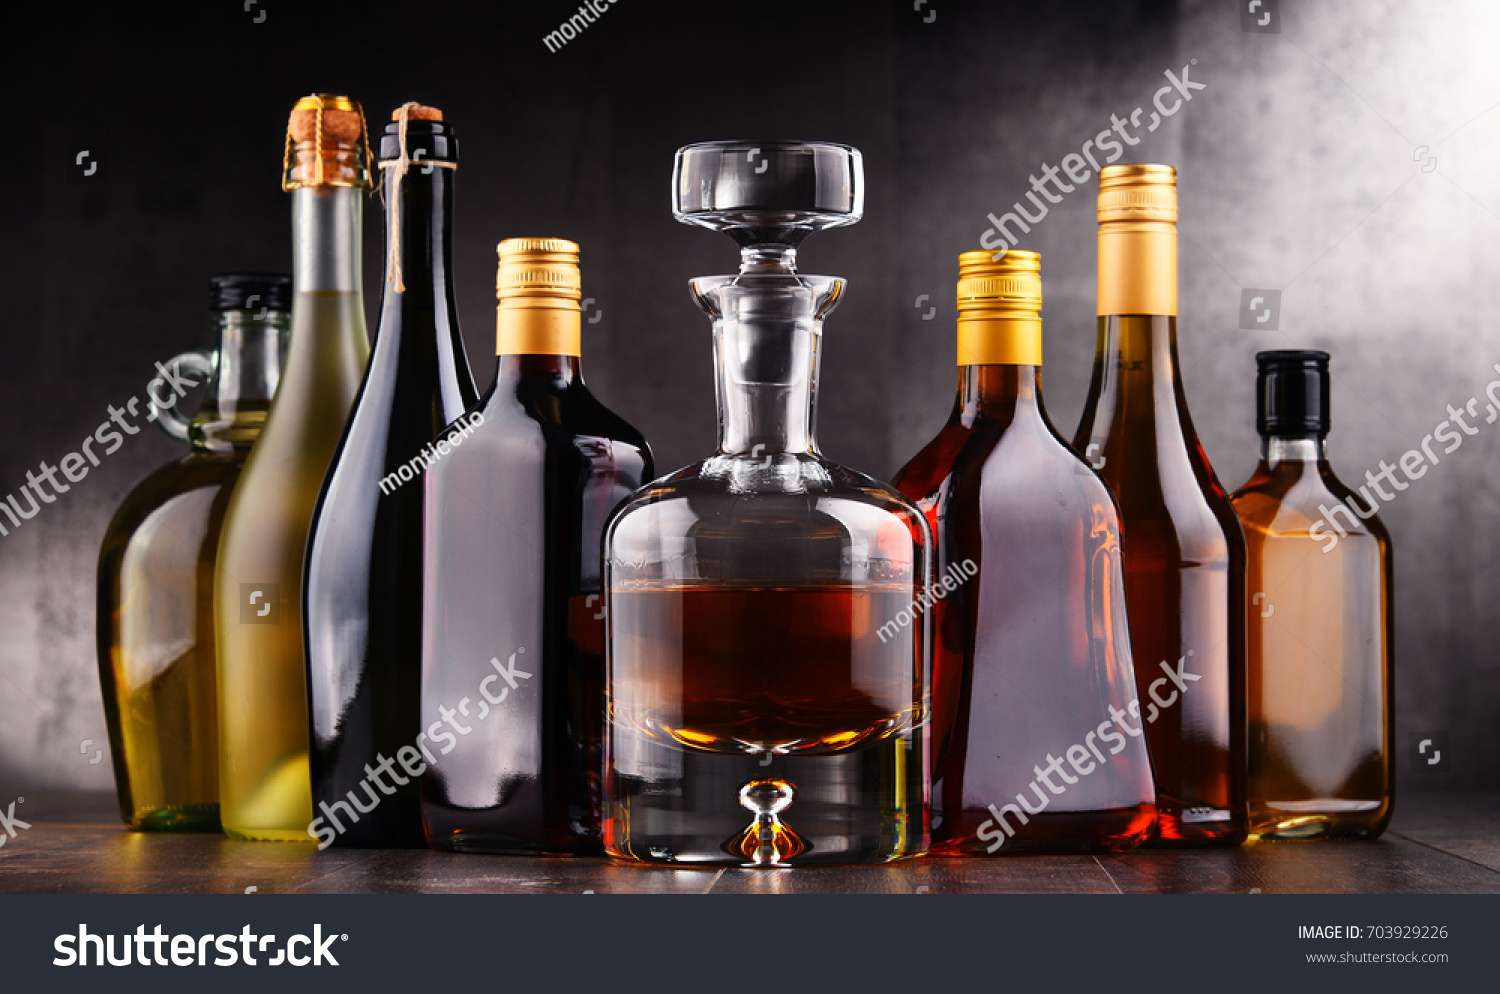 Composition with bottles of assorted alcoholic beverages. #703929226